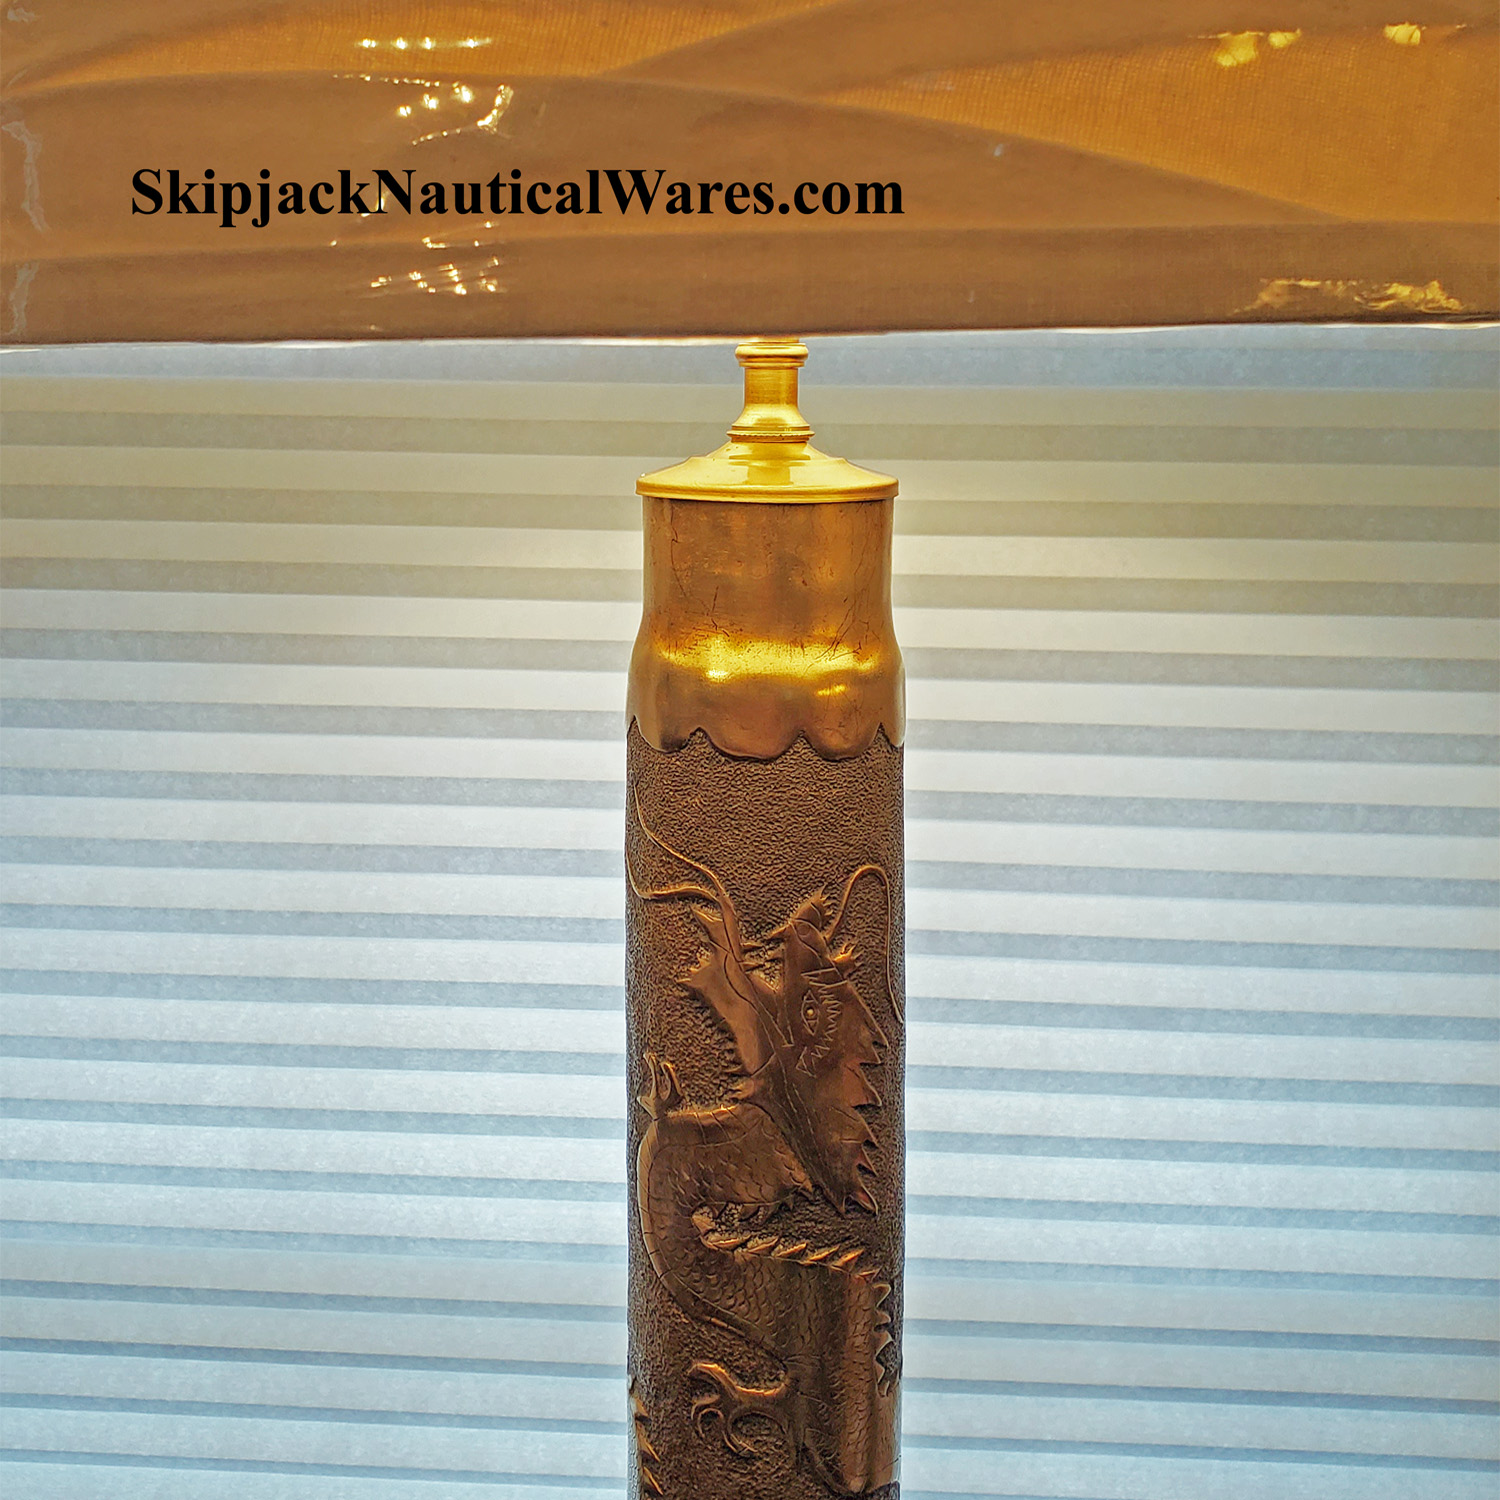 https://www.skipjackmarinegallery.com/mm5/graphics/00000001/3/trench_art_table_lamp_brass_shell_casing_chinese_dragons_WWII_Korean_war_CU.jpg